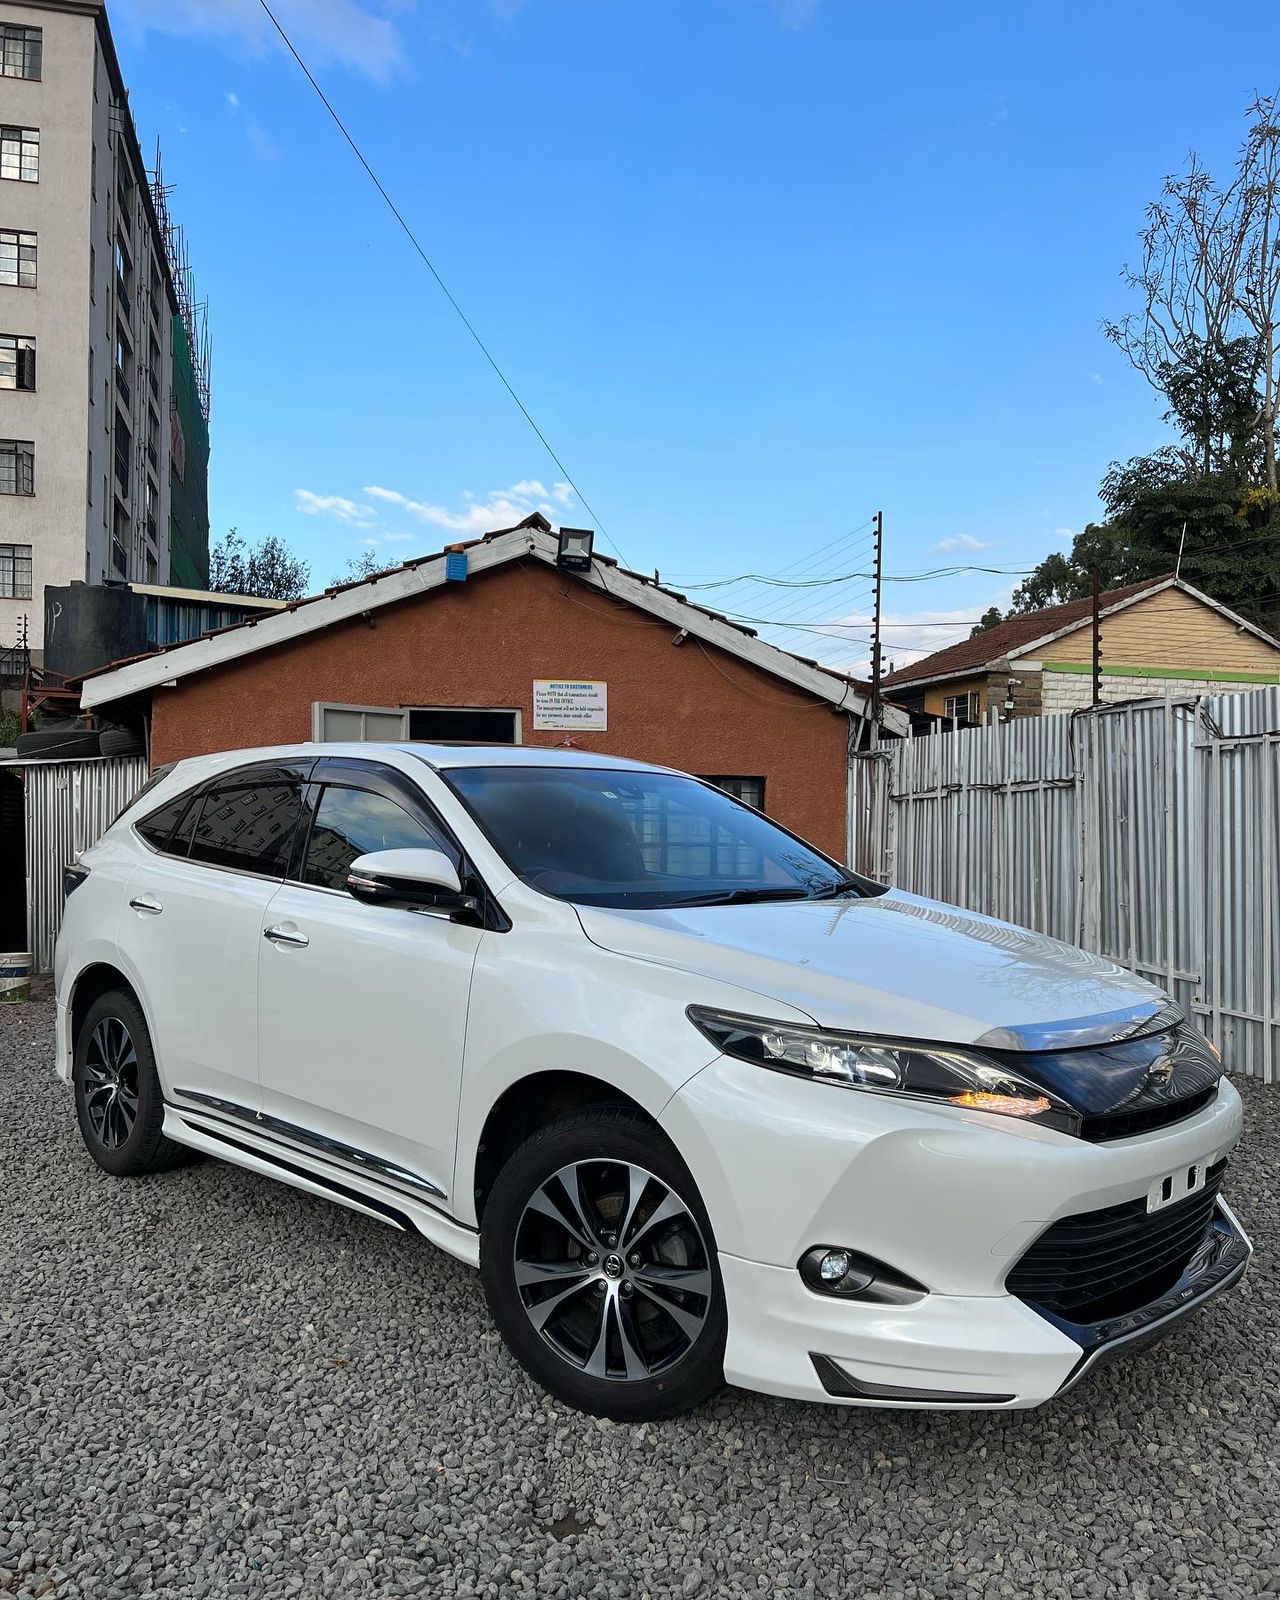 Toyota harrier 2015 Sunroof Leather HOTTEST CHEAPEST